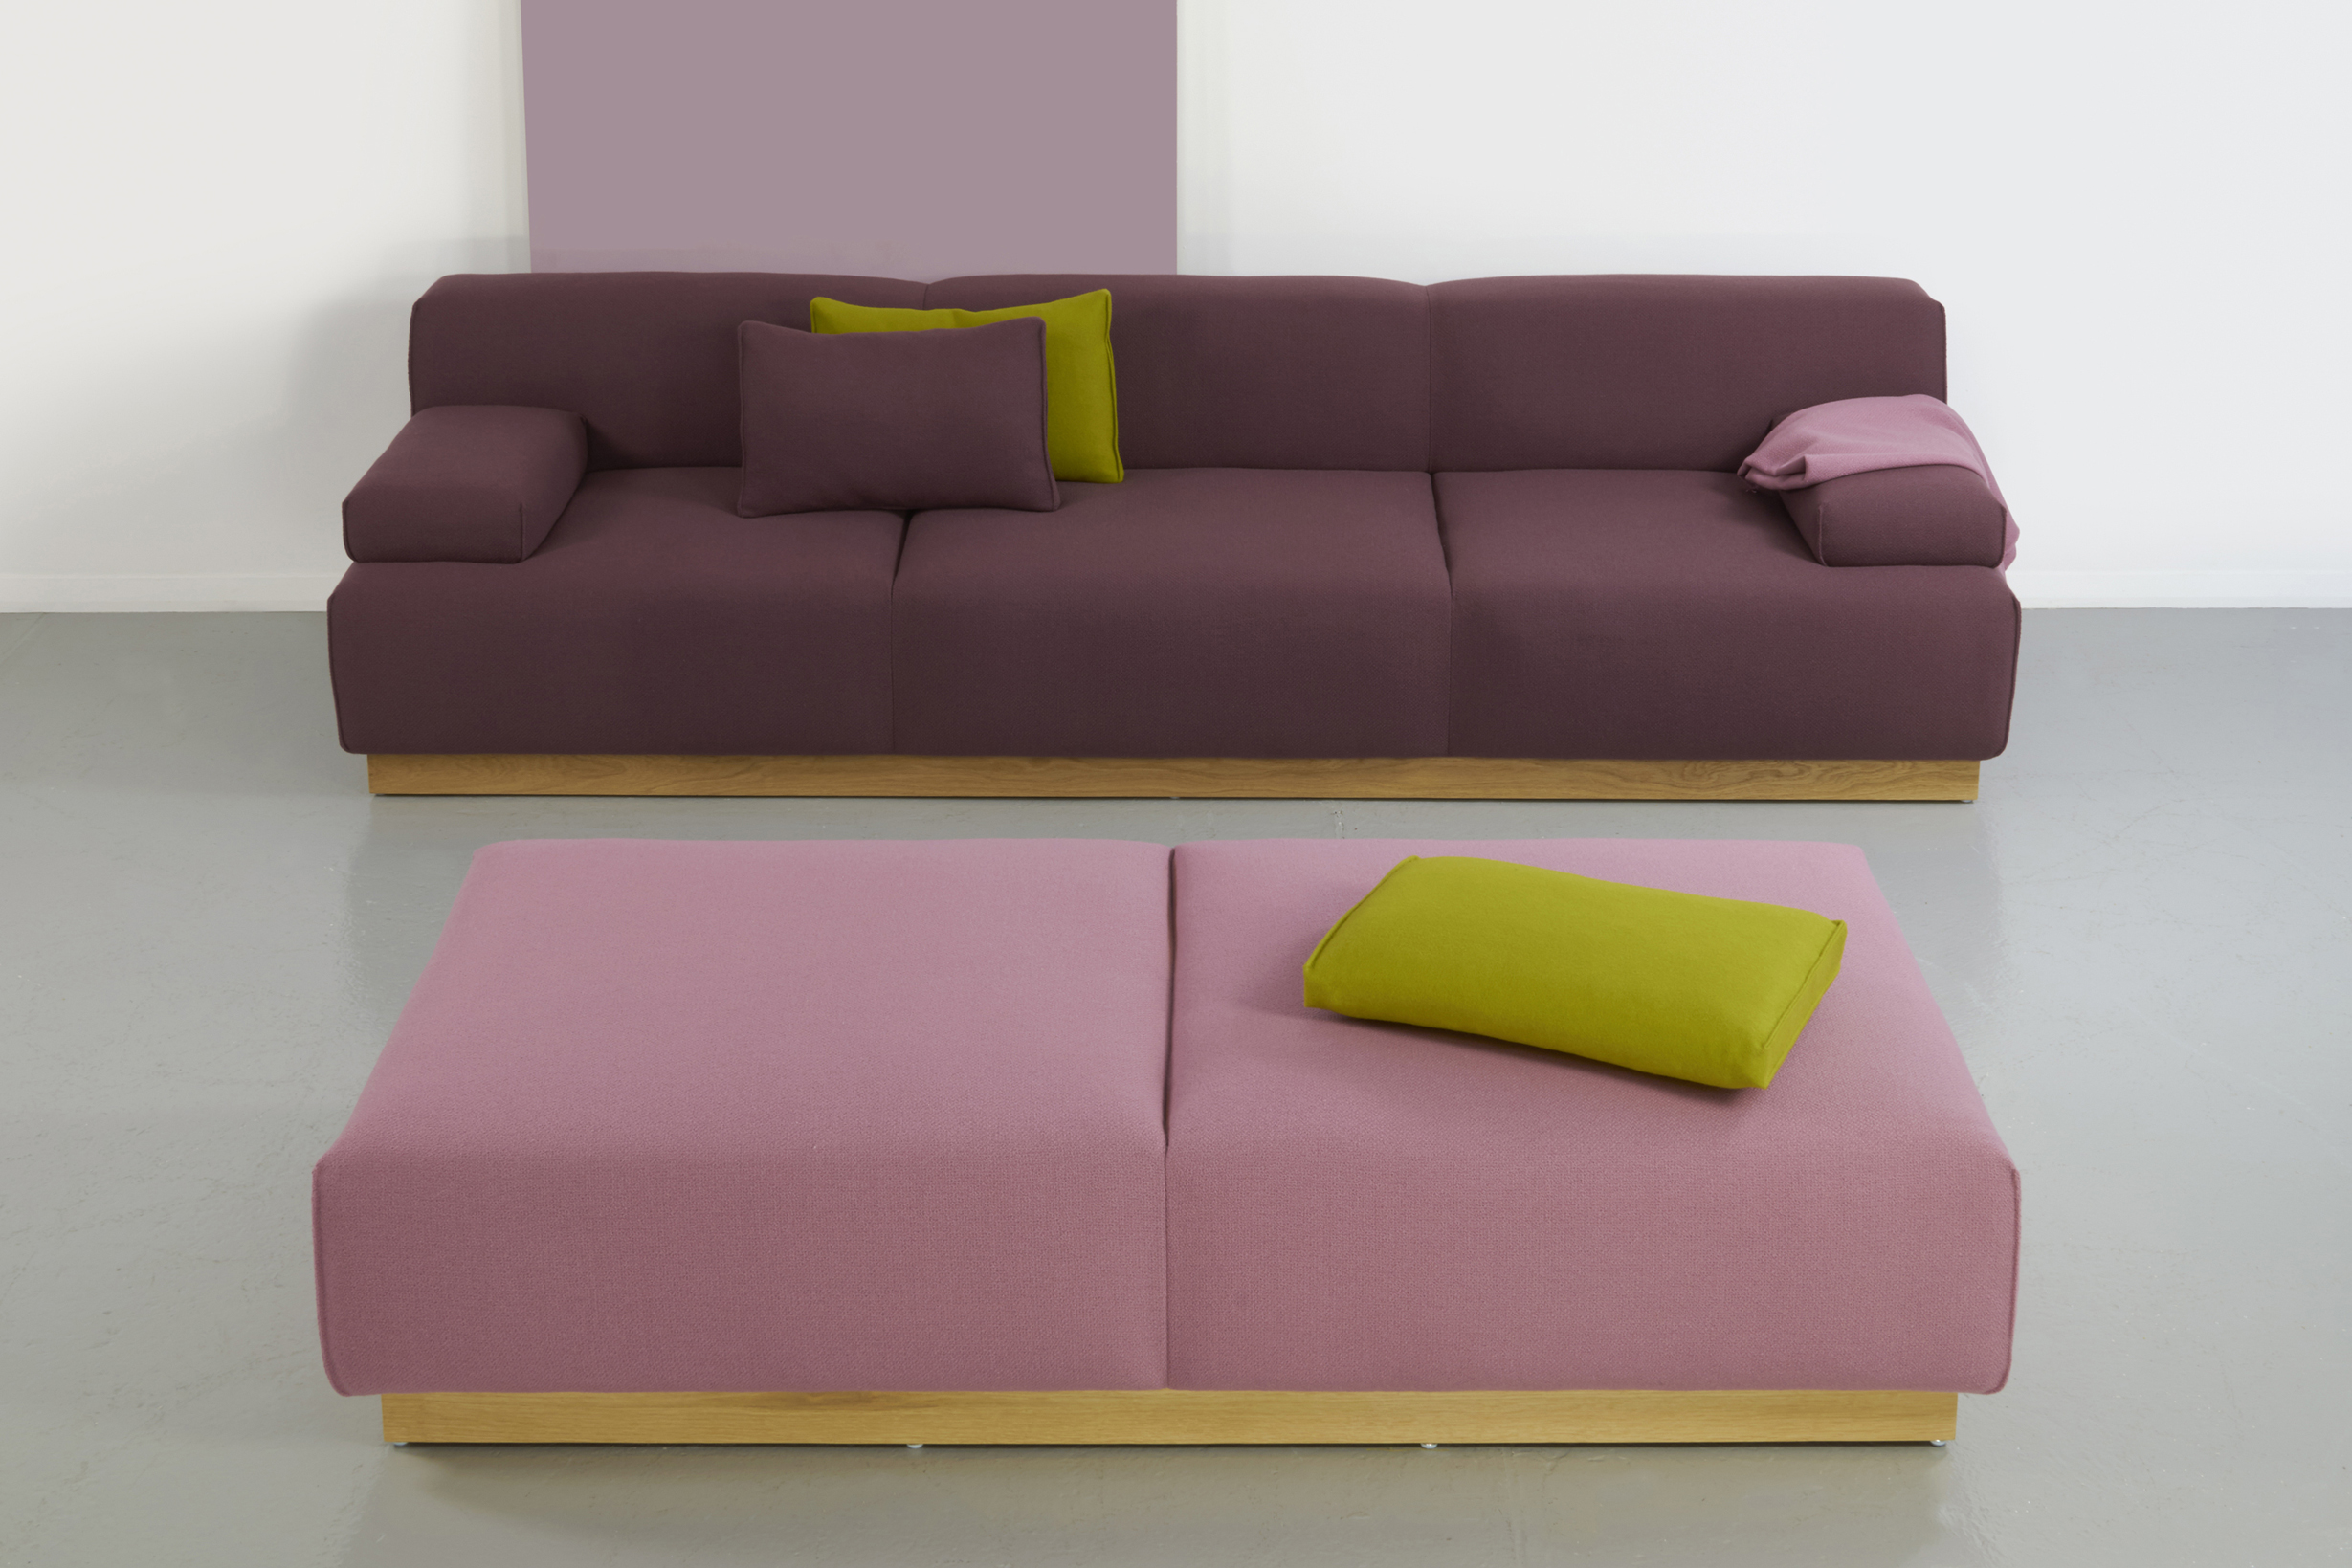 hm108s and hm108y scatter cushions with hm108b ottoman (2).jpg